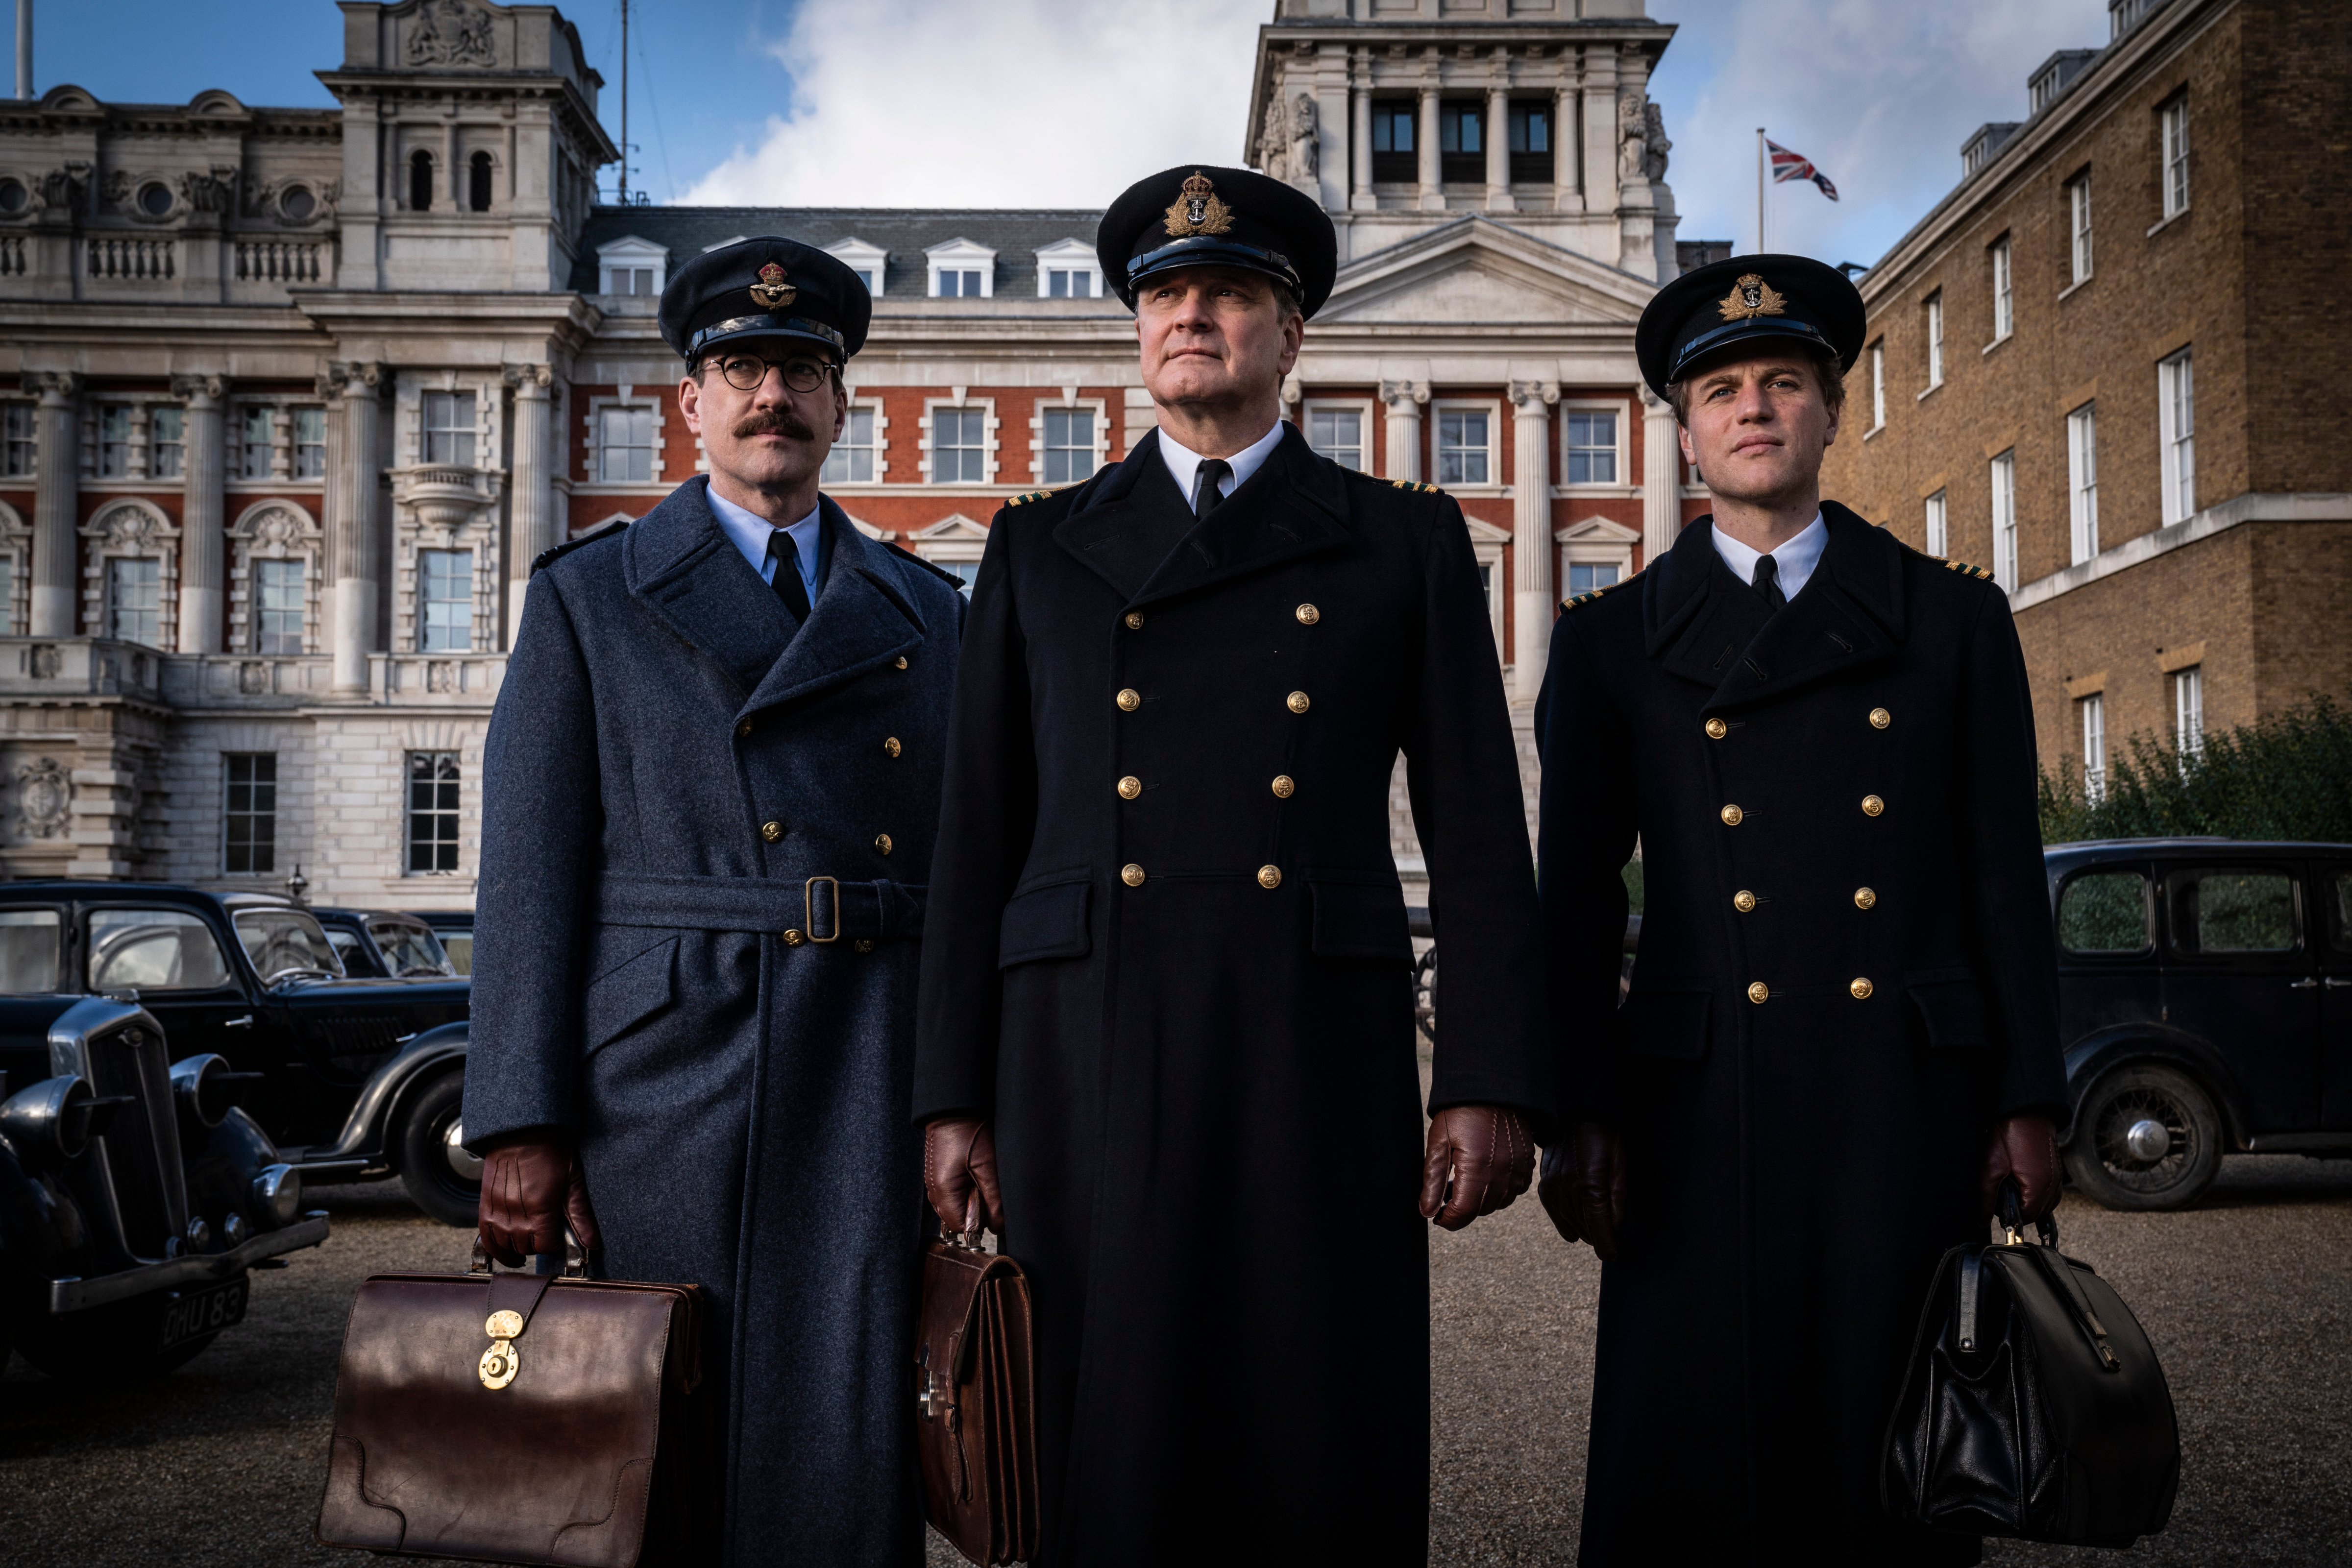 OPERATION MINCEMEAT (2022) Matthew Macfadyen as Charles Cholmondeley, Colin Firth as Ewen Montagu and Johnny Flynn as Ian Fleming. Cr: Giles Keyte/See-Saw Films, Courtesy of Netflix (Giles Keyte/See-Saw Films, Courtesy of Netflix—Haversack Films Limited)